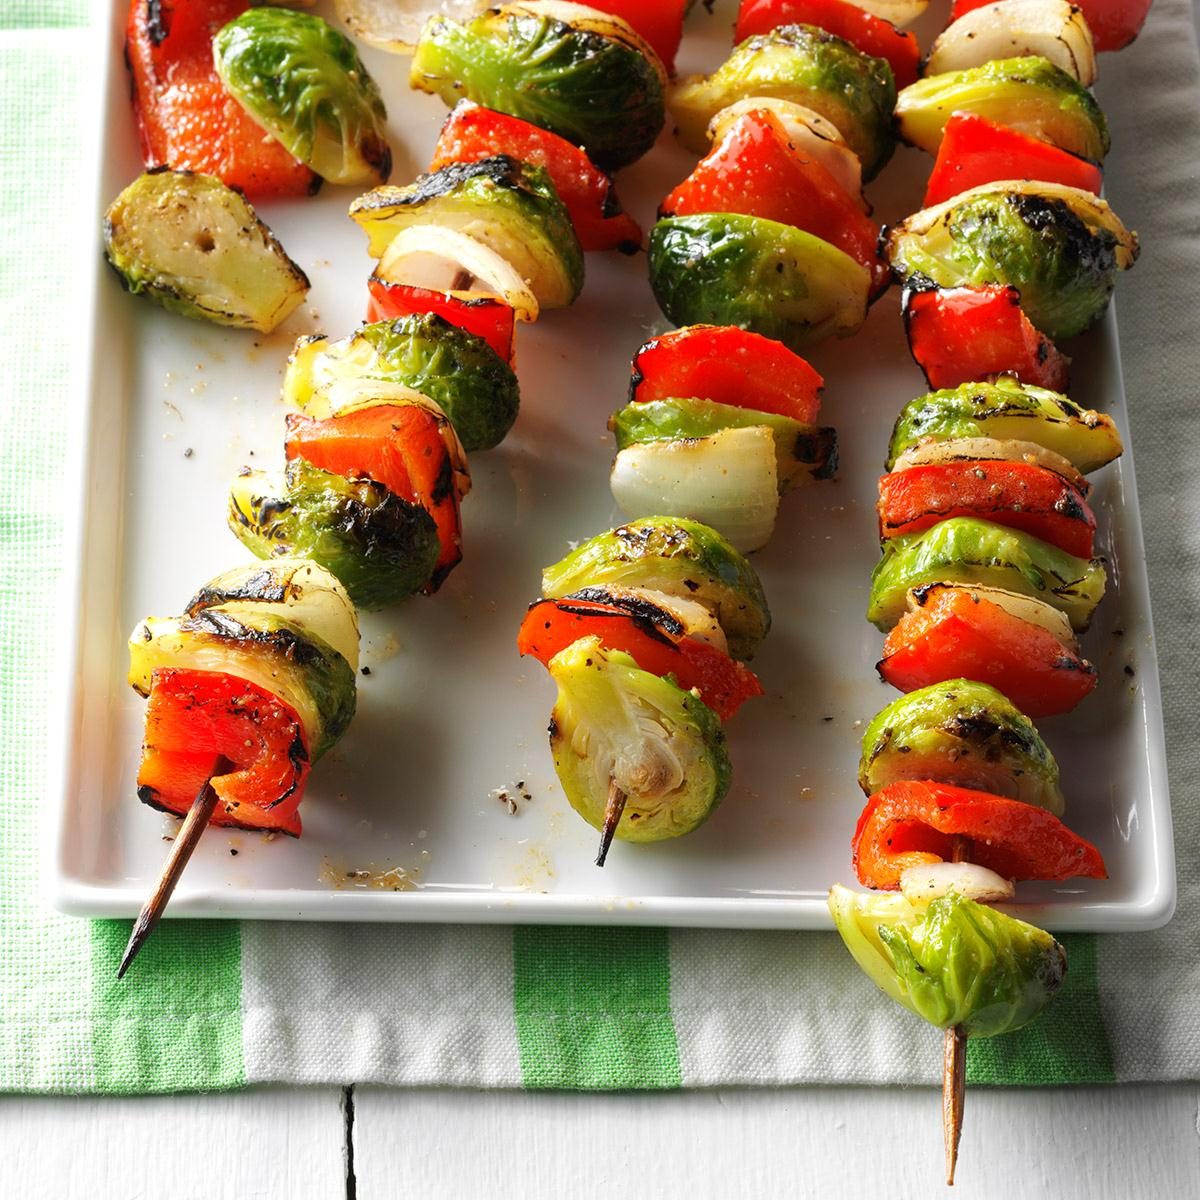 https://www.tasteofhome.com/wp-content/uploads/2018/01/Grilled-Brussels-Sprouts_EXPS_THCA17_184375_D05_26_4b-4.jpg